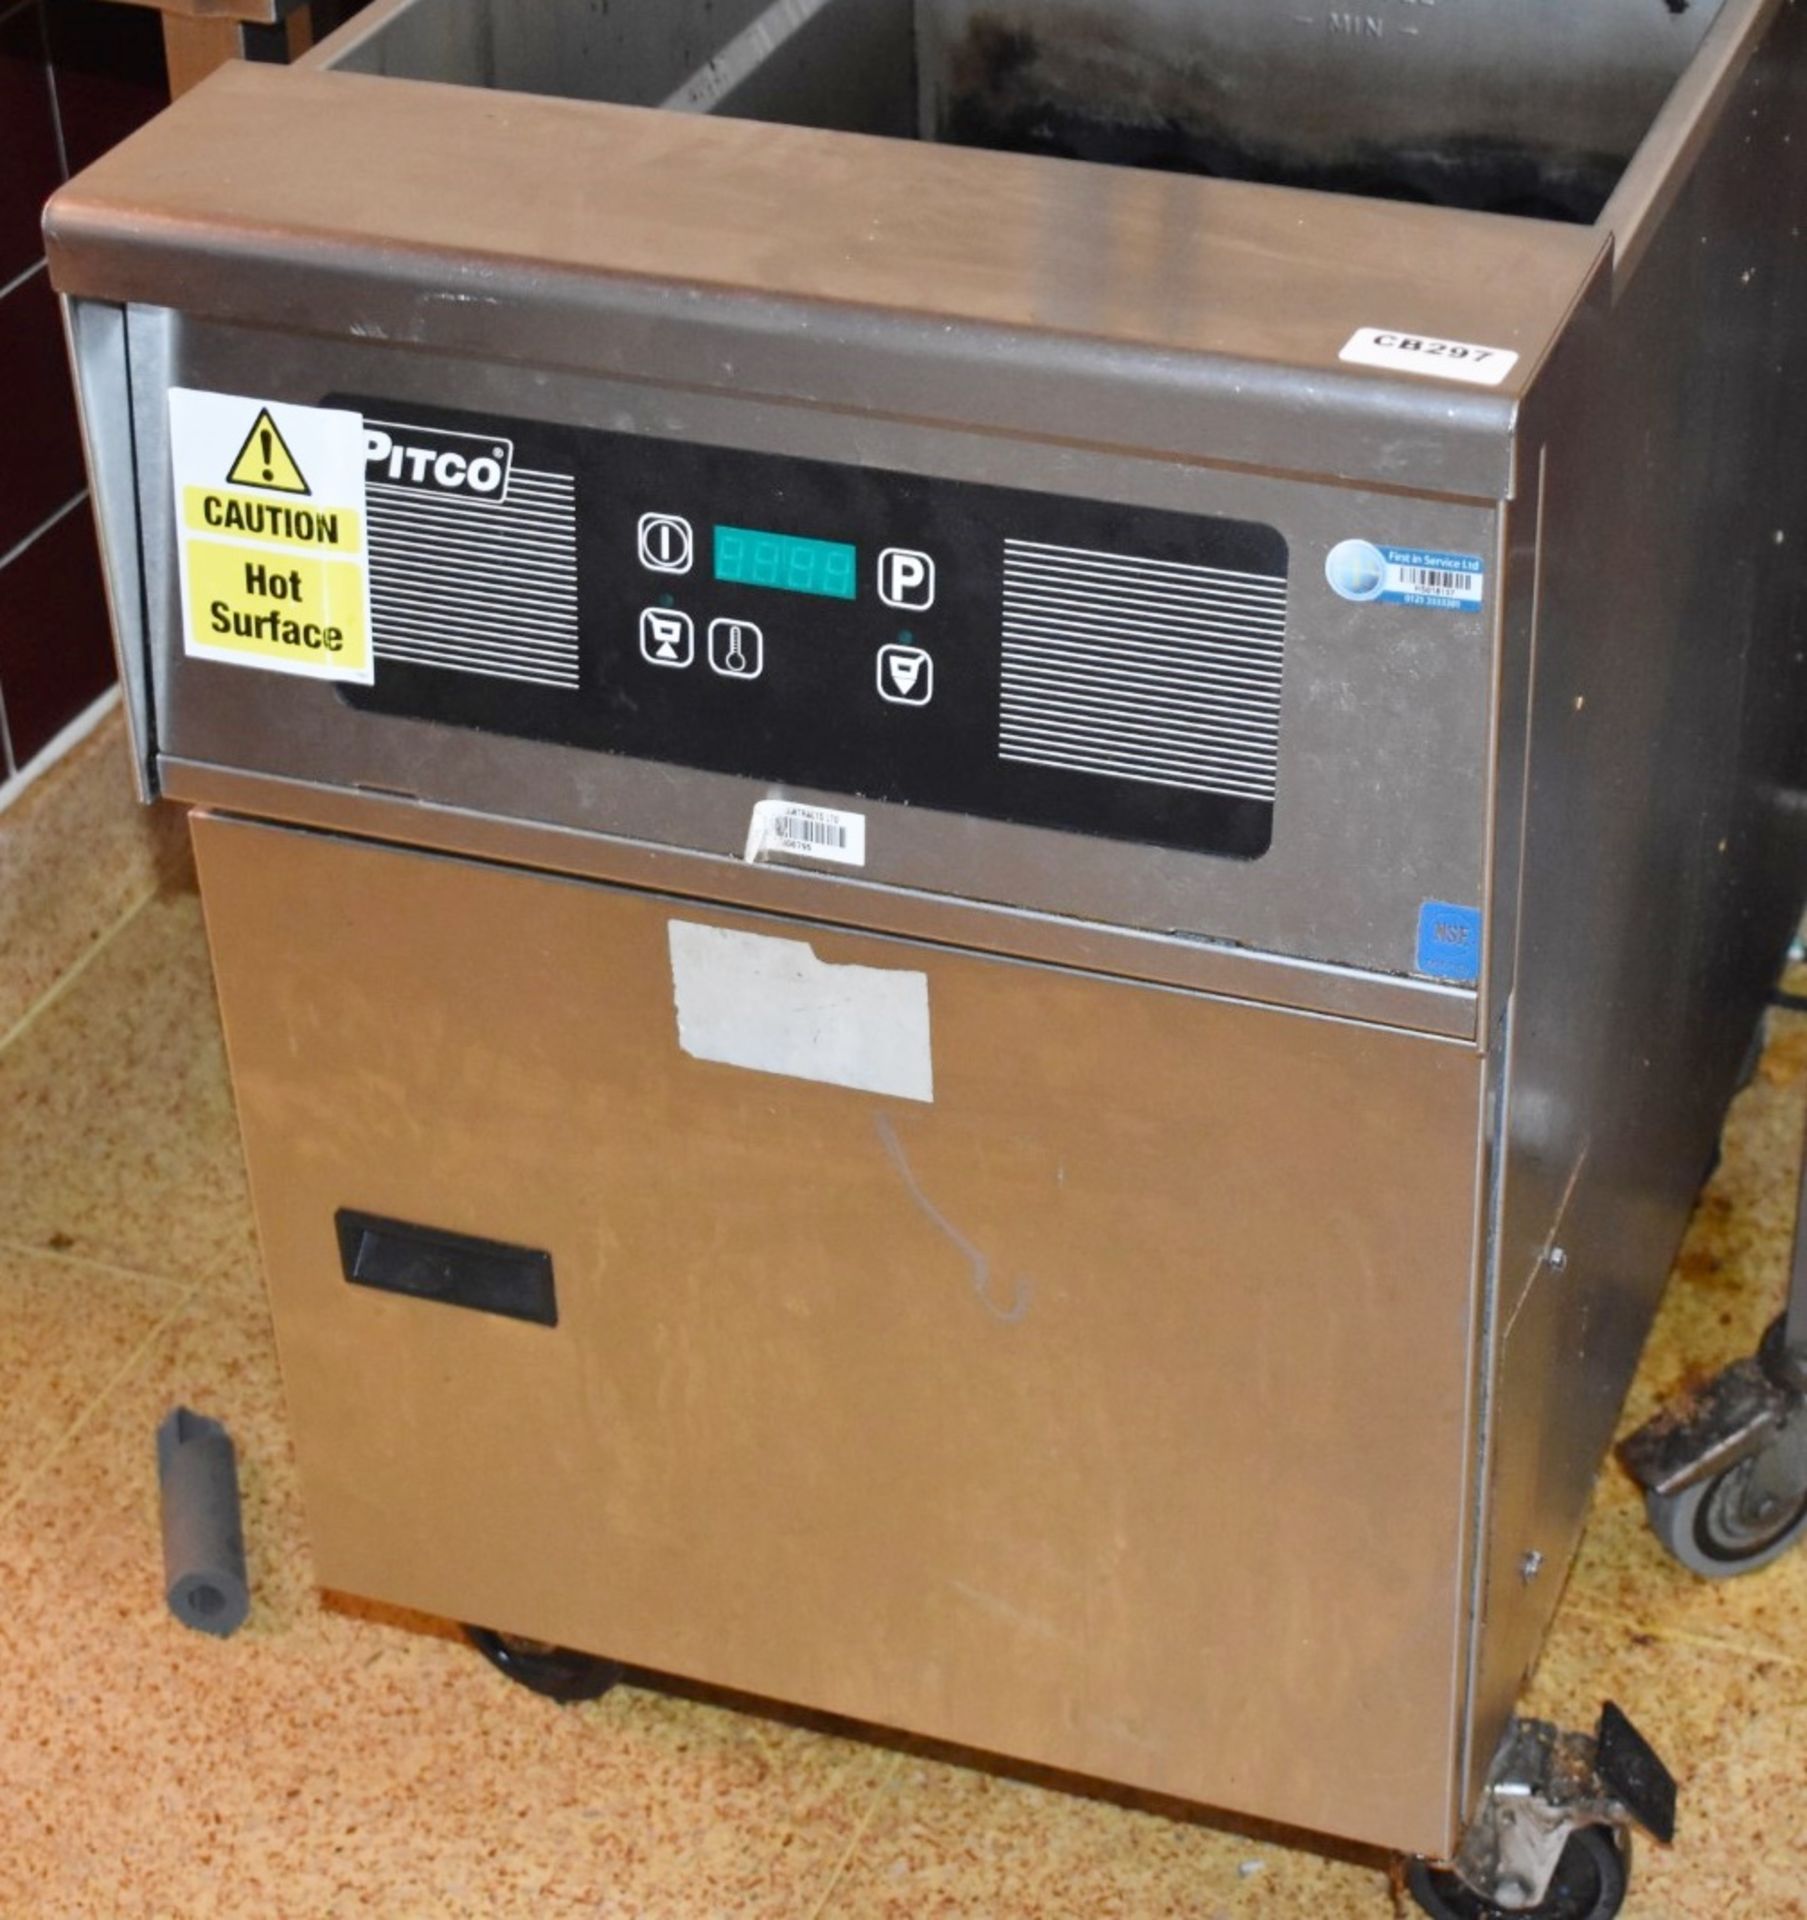 1 x Pifco Frialator Single Basket Gas Fryer With Basket Lifts - Stainless Steel Exterior - Model - Image 3 of 8